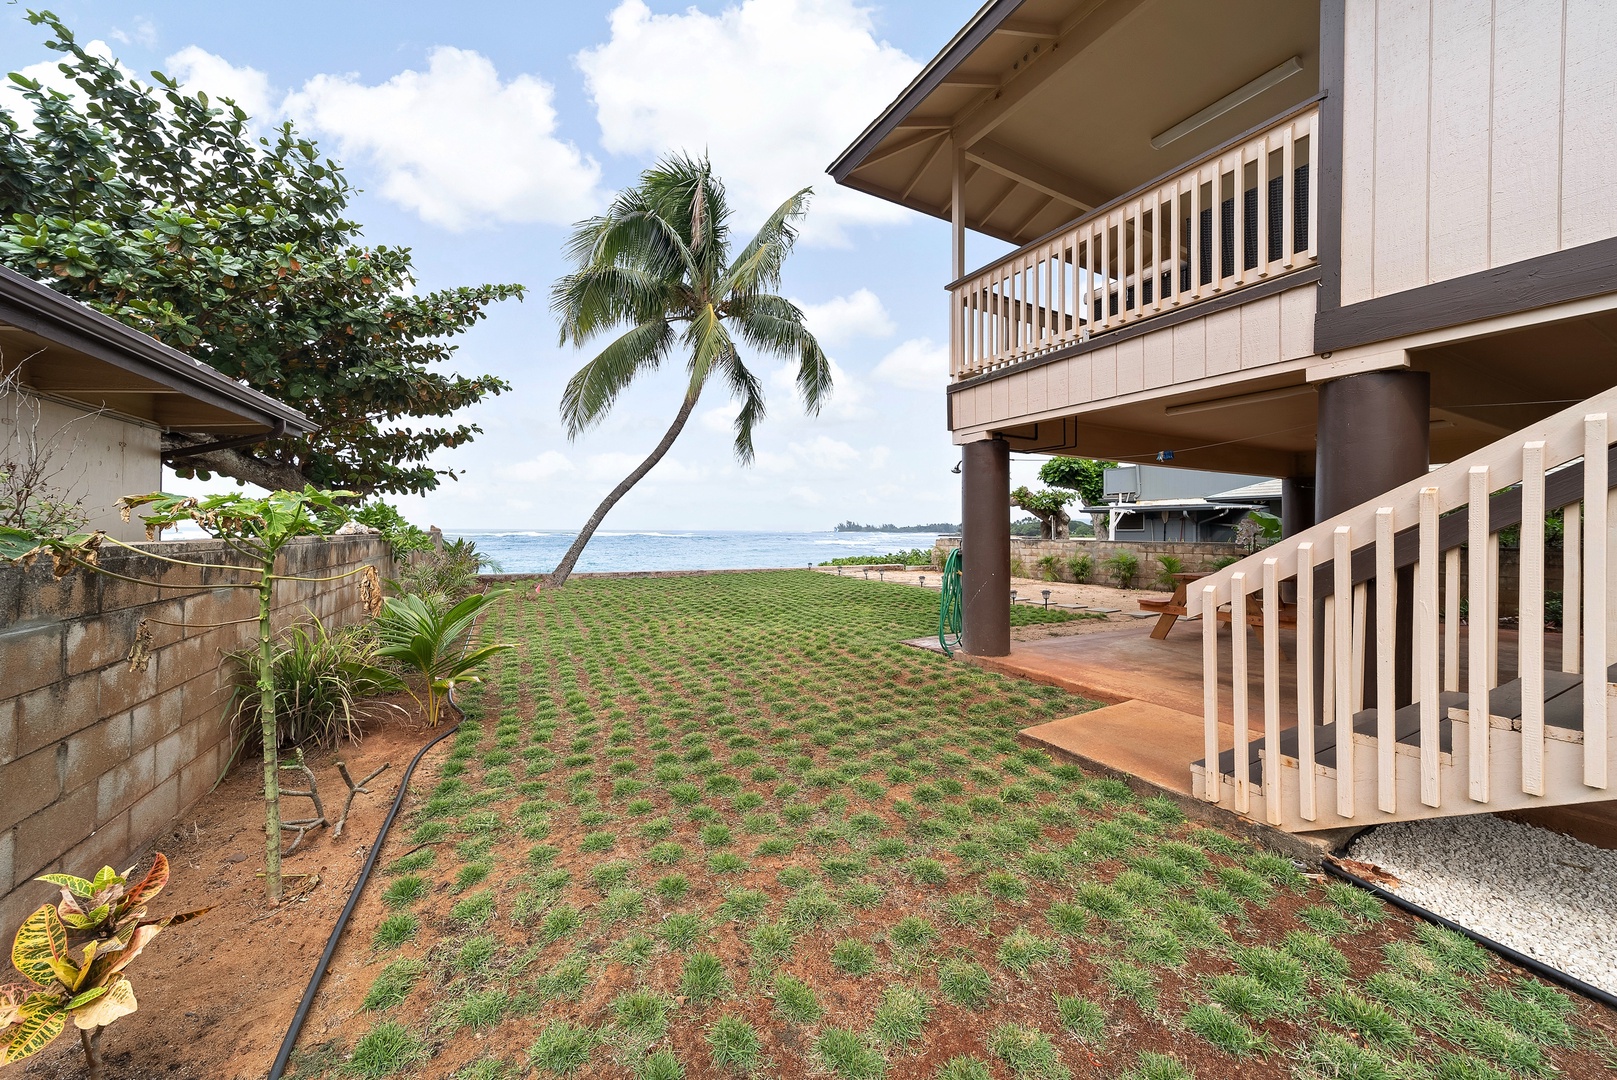 Haleiwa Vacation Rentals, Pikai Hale - Tropical landscaping in the making